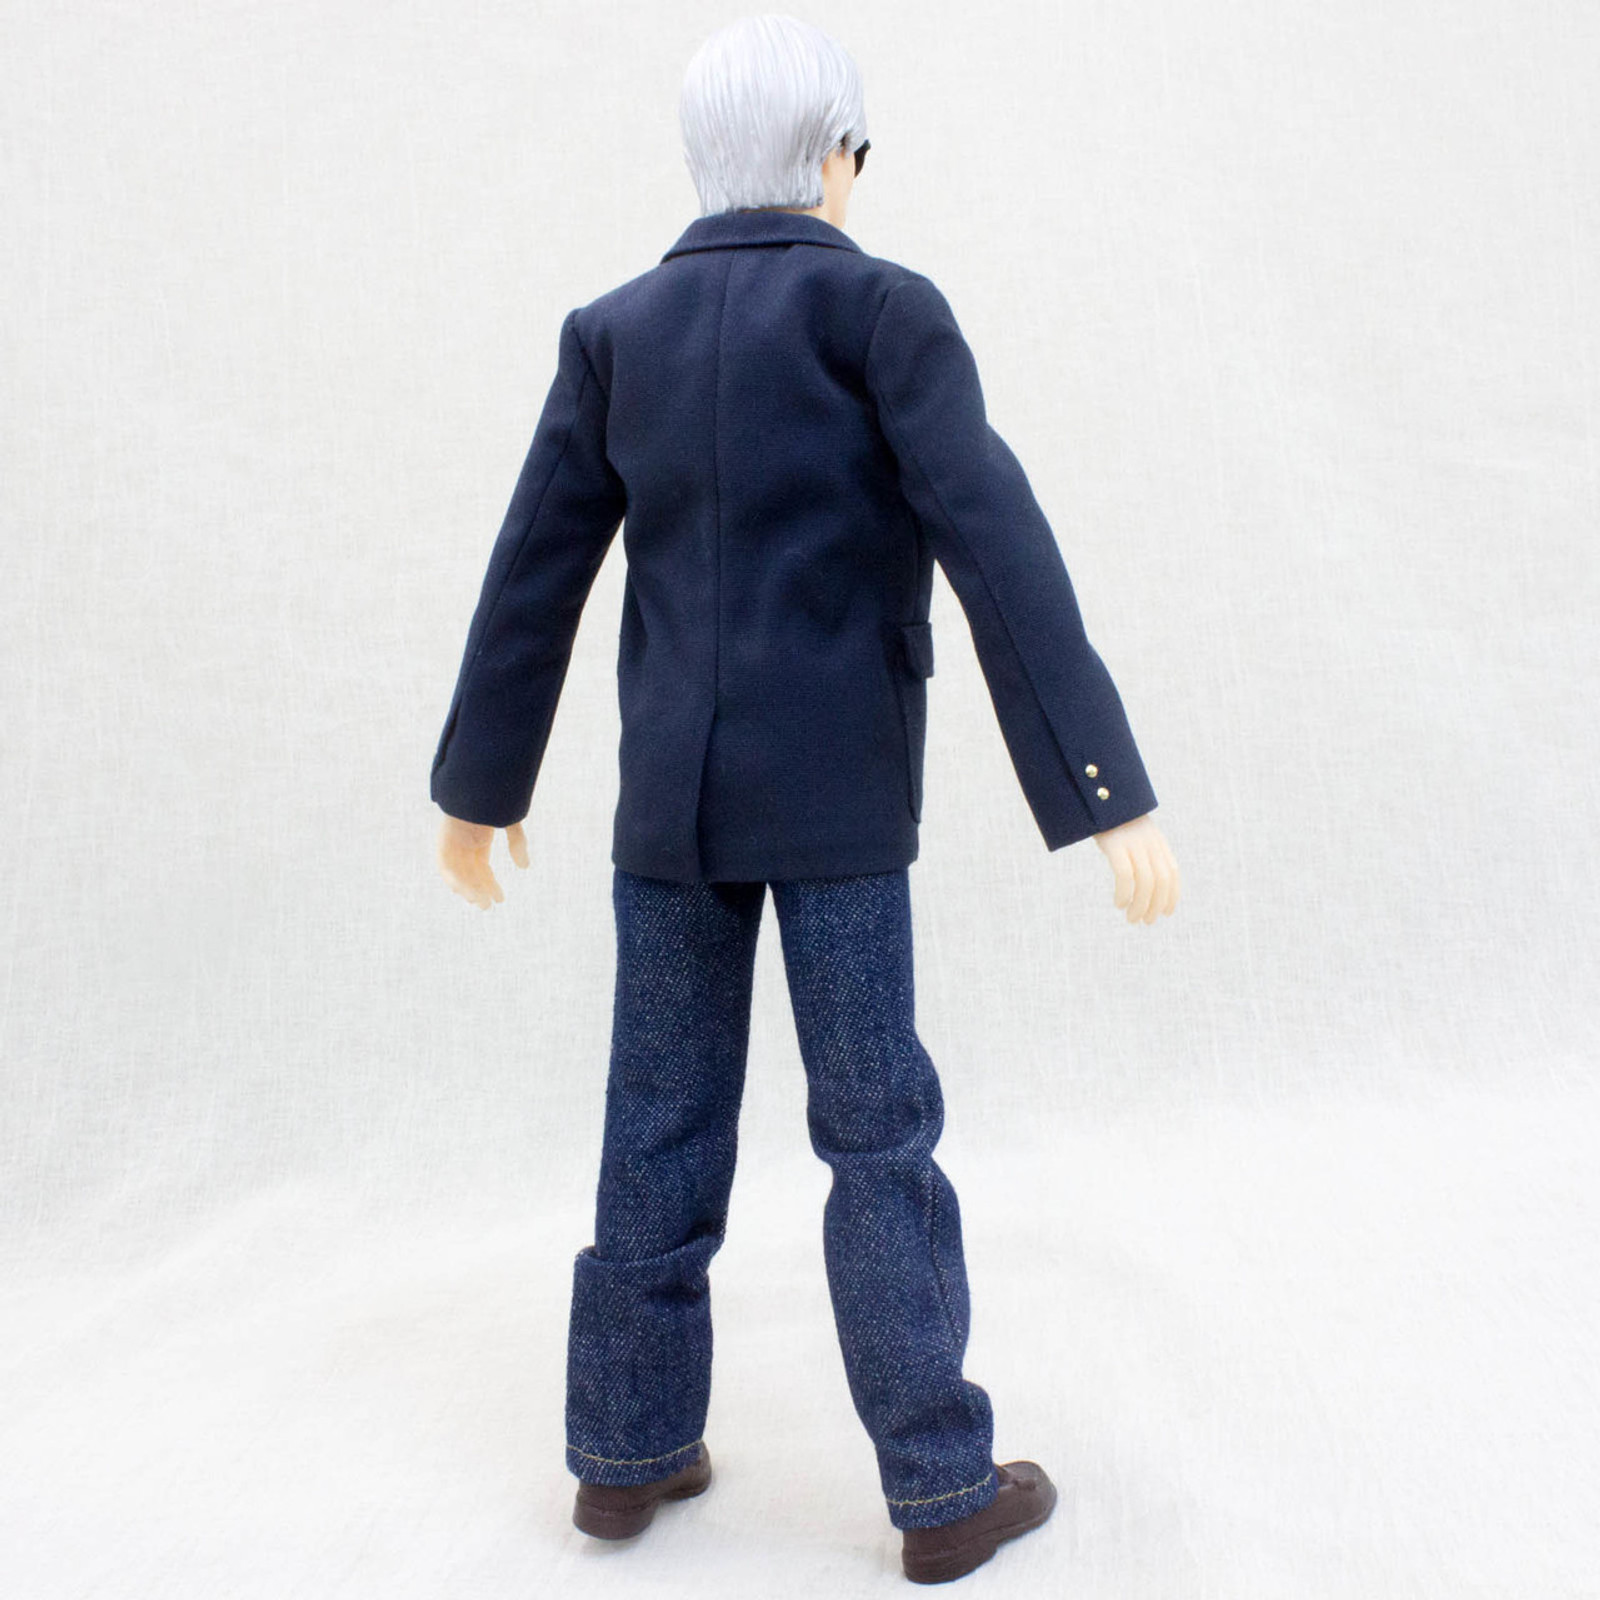 Andy Warhol '60s Style Real Action Heros Figure Medicom Toy